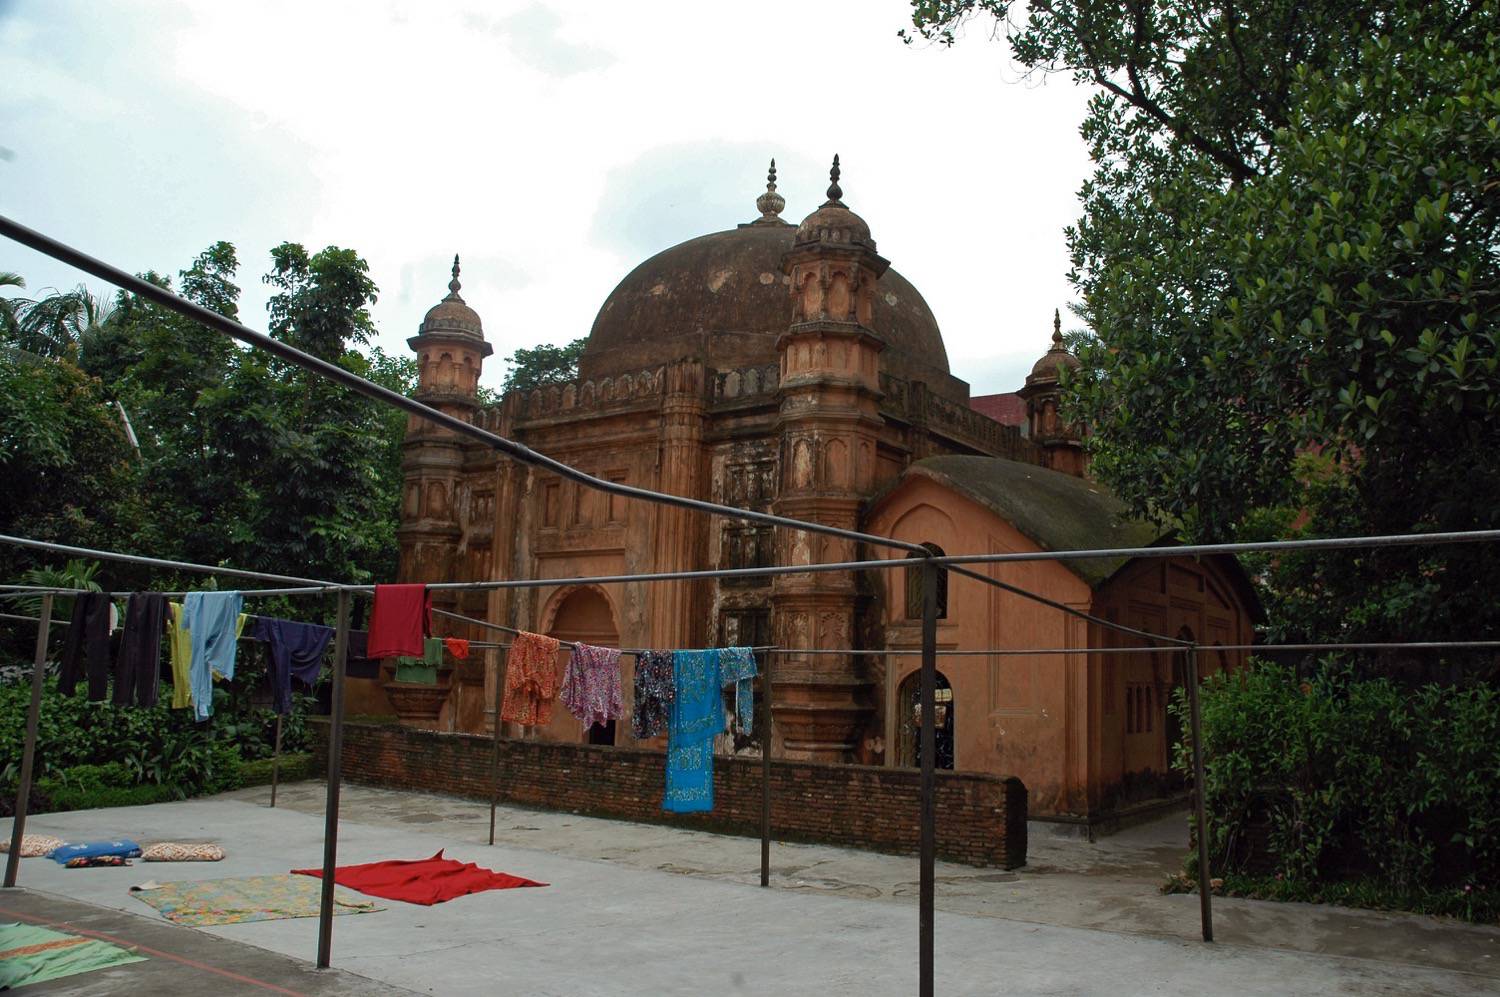 Exterior view of the Dargah Sharif and mosque.